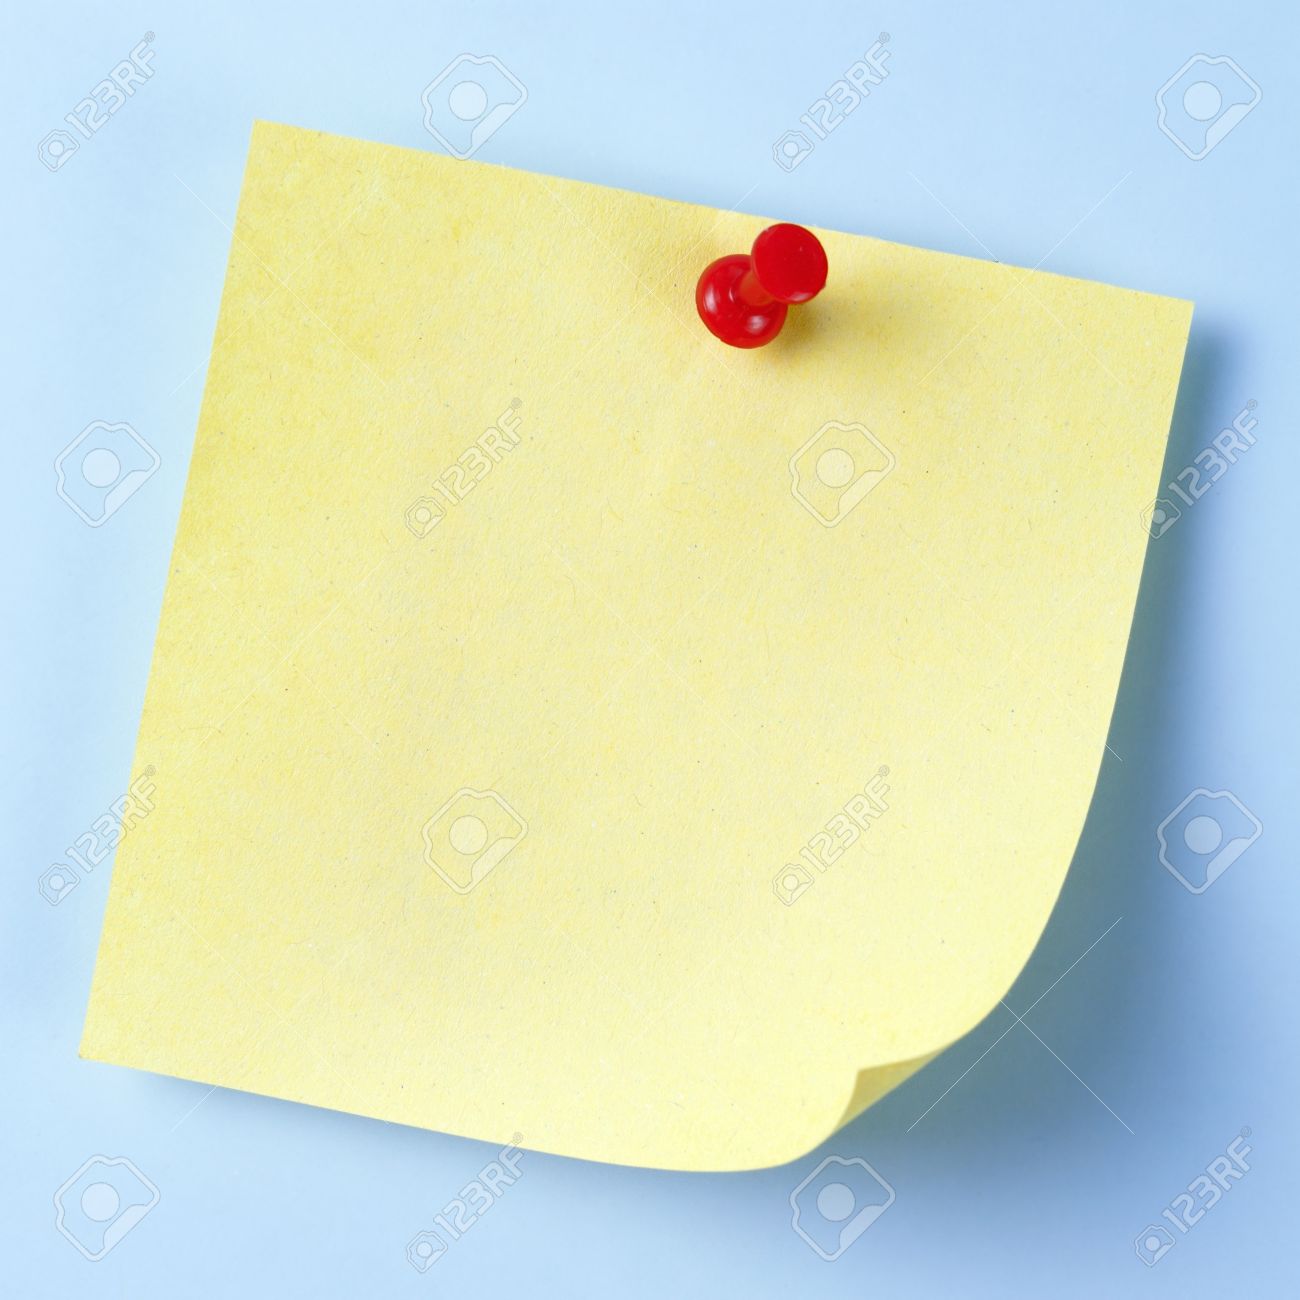 Paper For Important Reminders On A Blue Background Stock Photo